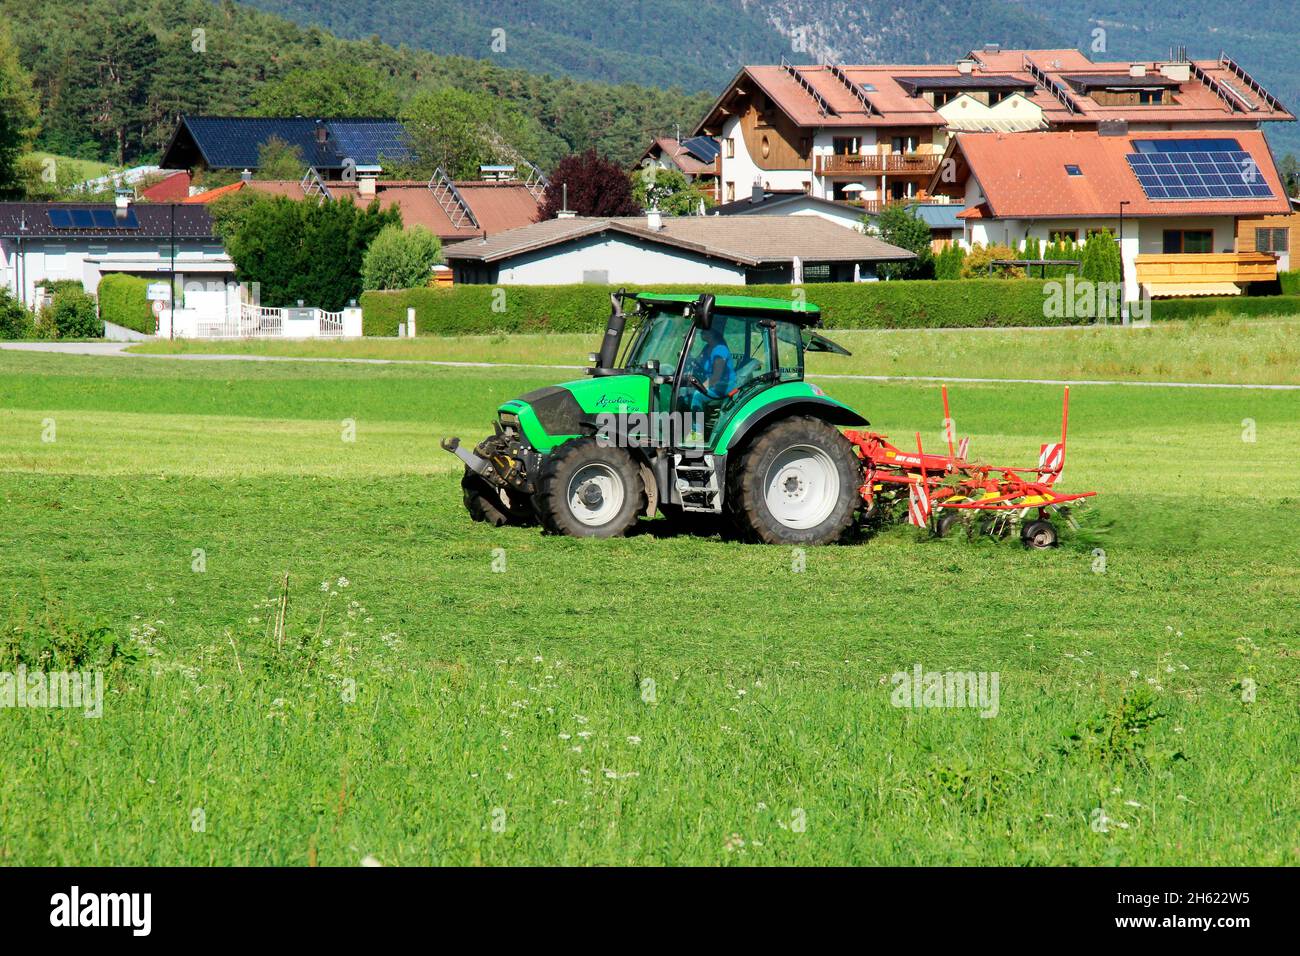 tractor,agrotron k 90,61.8 kw,84 ps,smallest model of the first agrotron k series introduced in 2005 by deutz-fahr with rotary haymaker,austria,tyrol,wildermieming, Stock Photo